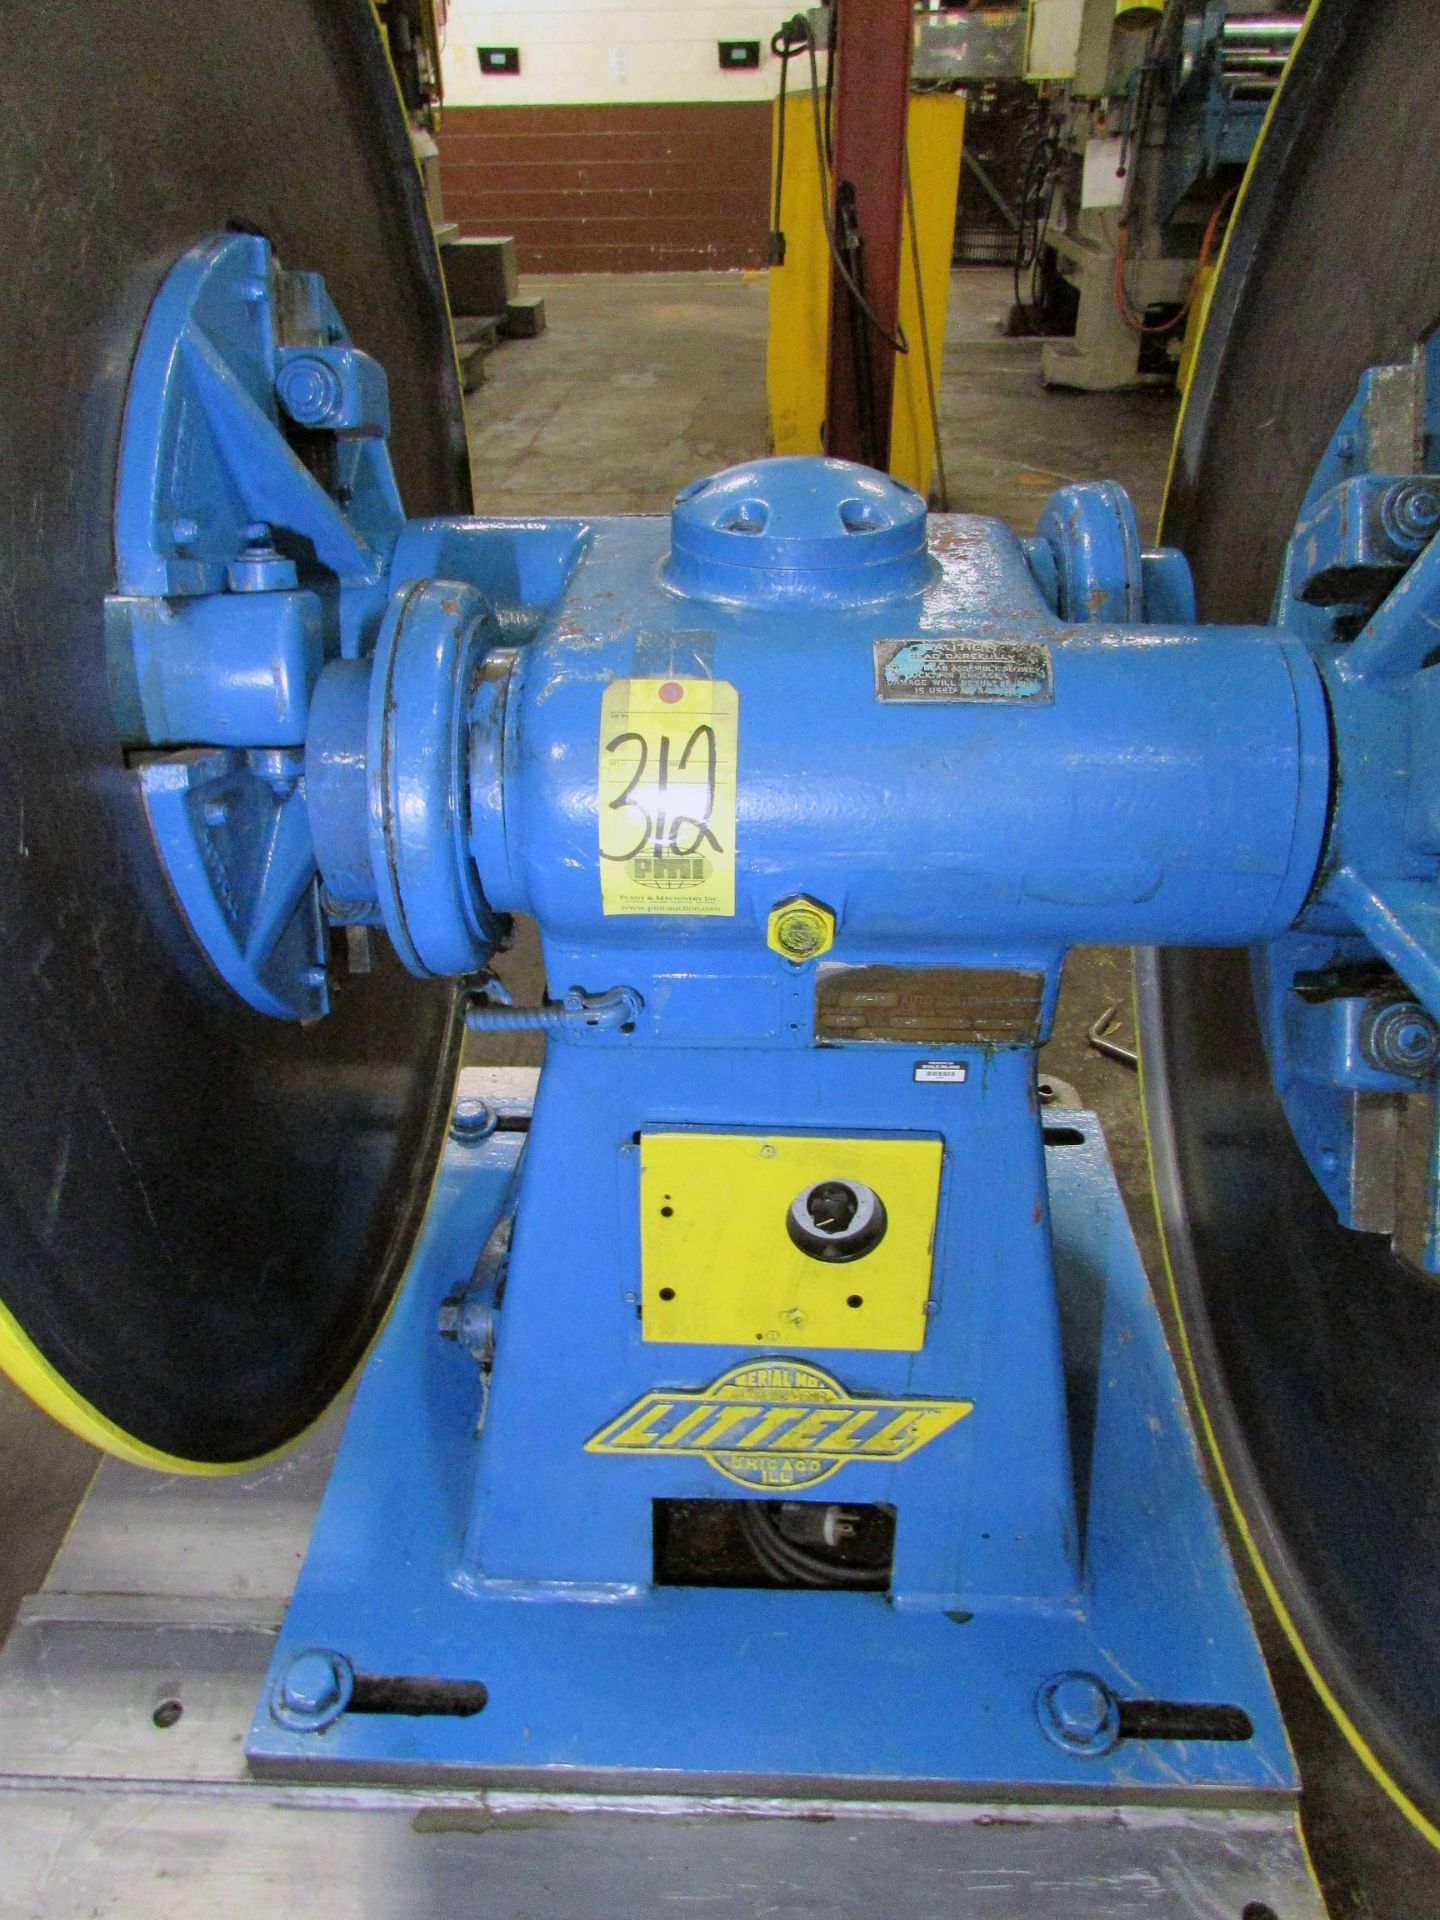 DOUBLE COIL REEL, LITTELL 4,000 LB. CAP. MDL. 40-18,18”-22” I.D., 20” max. width, manual - Image 7 of 8